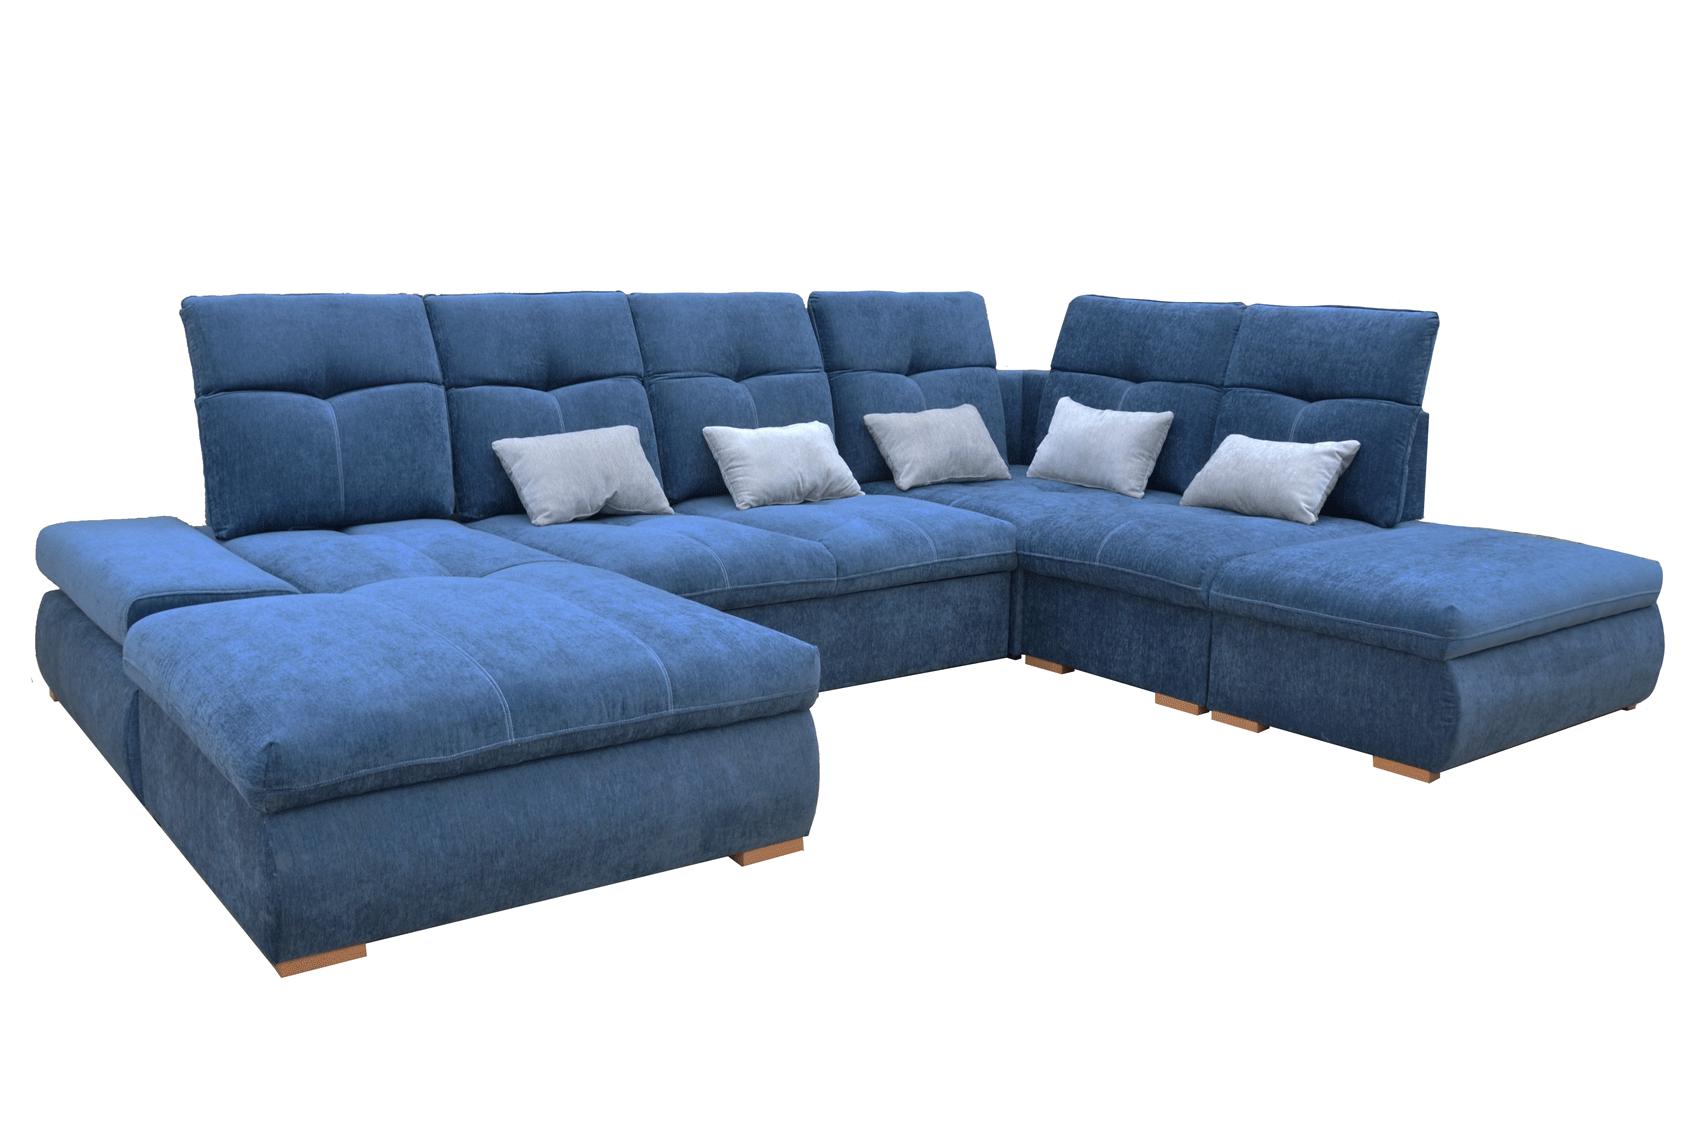 Contemporary, Modern Sectional Sofa Bed OPERASECTIONAL OPERASECTIONAL in Blue Fabric